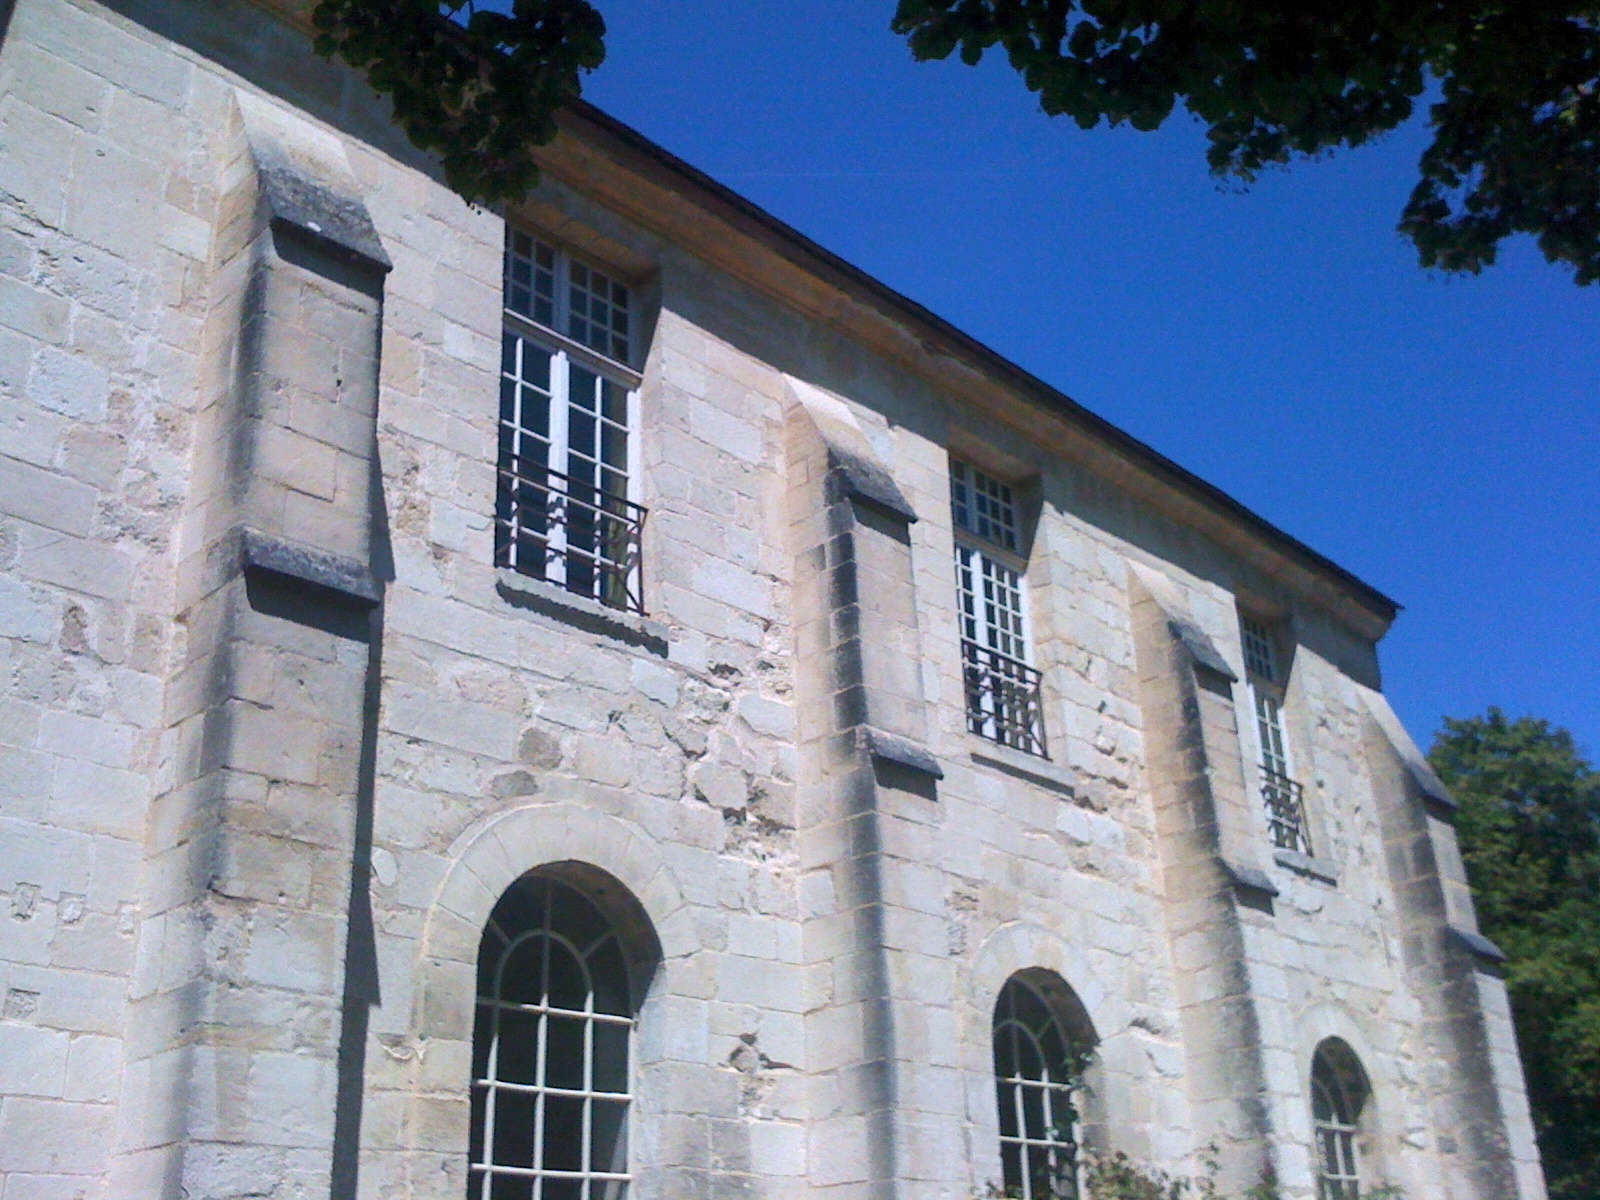 the windows of a stone building with a fence